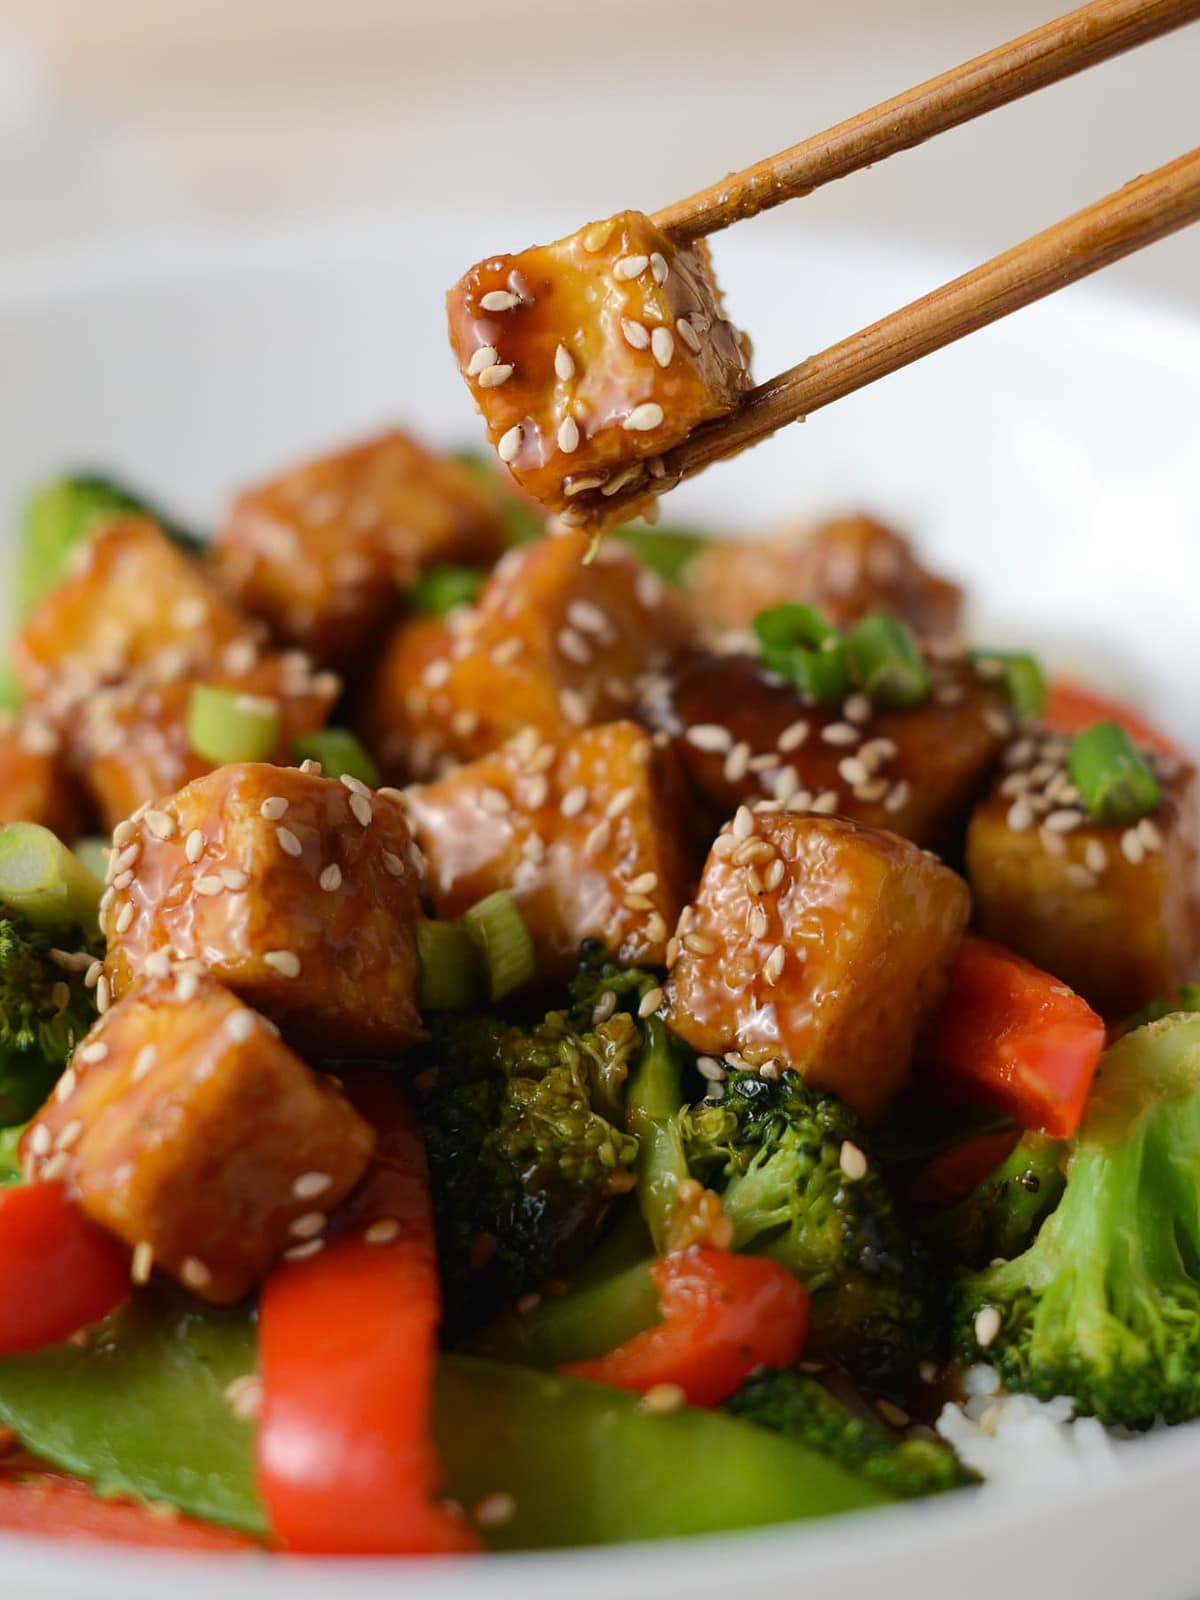 This is a photo of a chopstick holding a piece of teriyaki tofu.